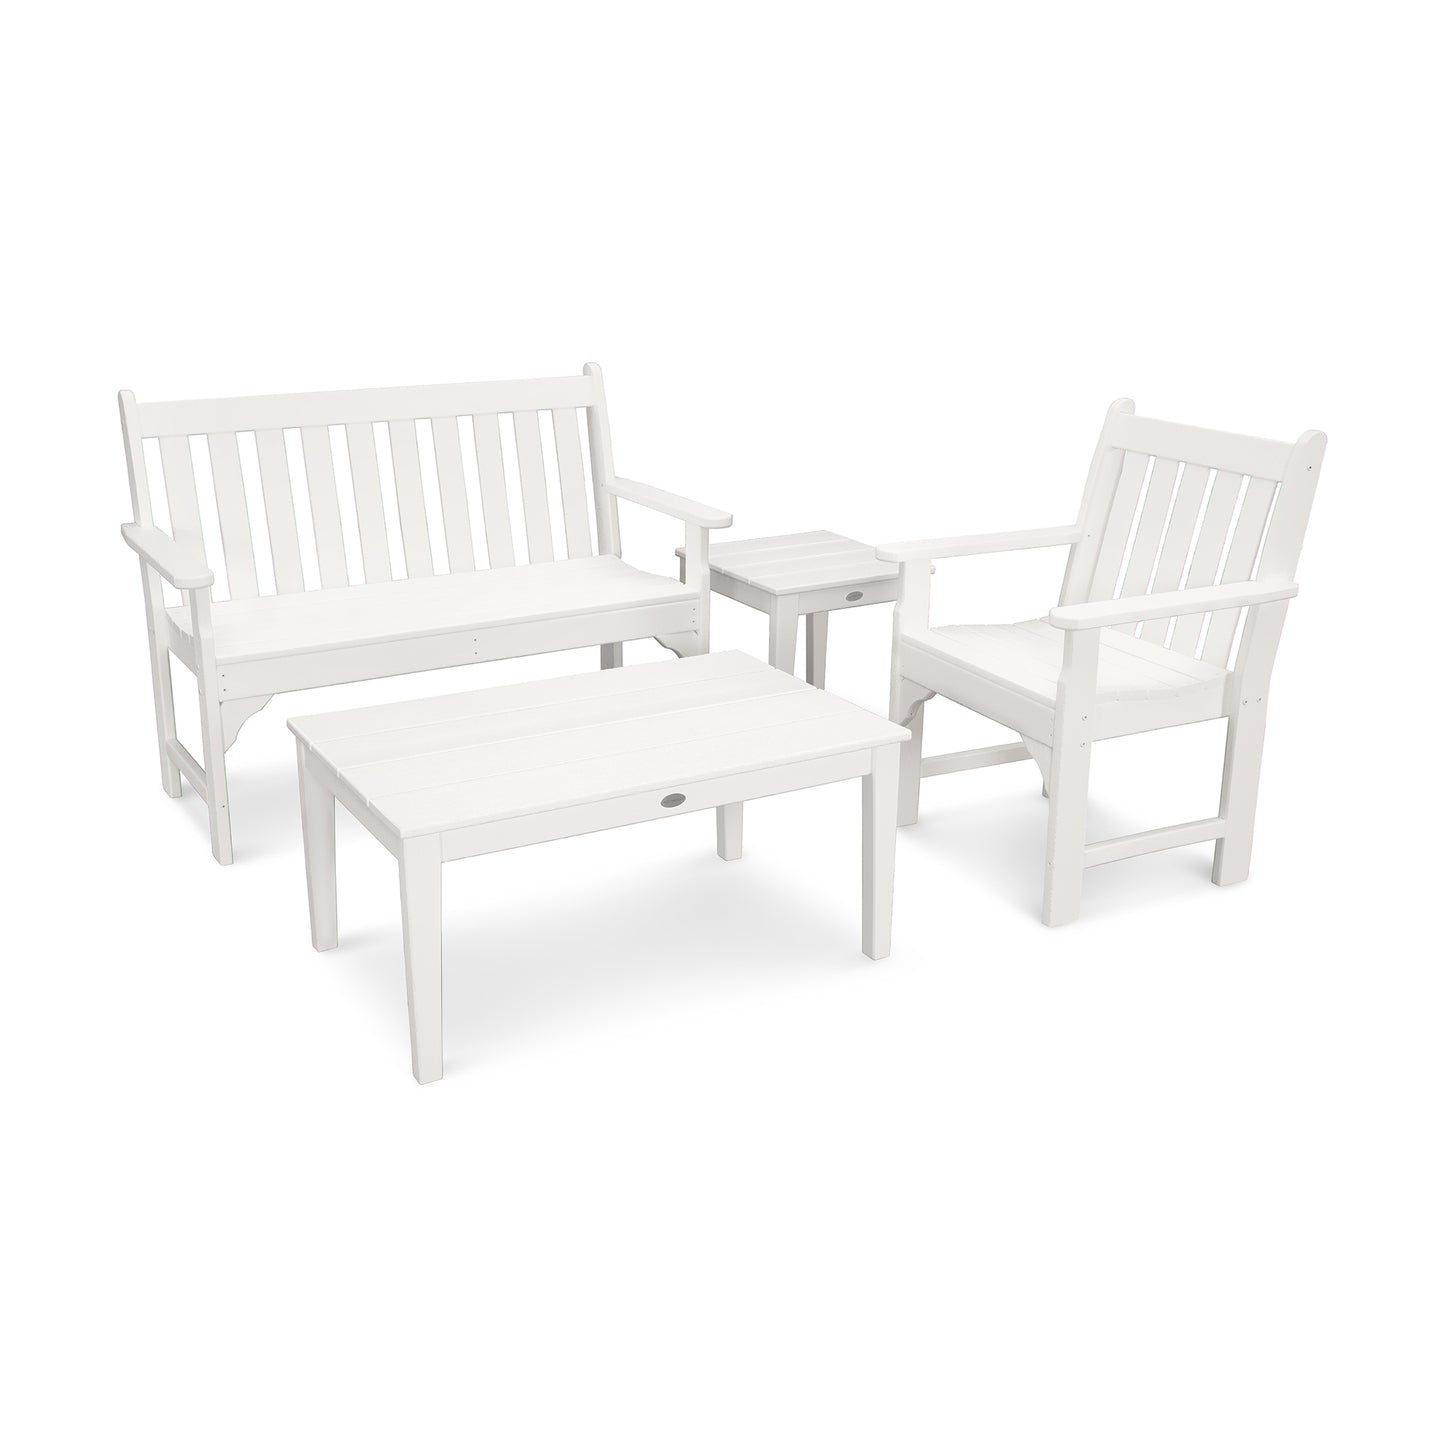 A set of white POLYWOOD Vineyard 4-Piece Bench Seating Set consisting of a bench, two chairs, and a coffee table, displayed against an all-white background.